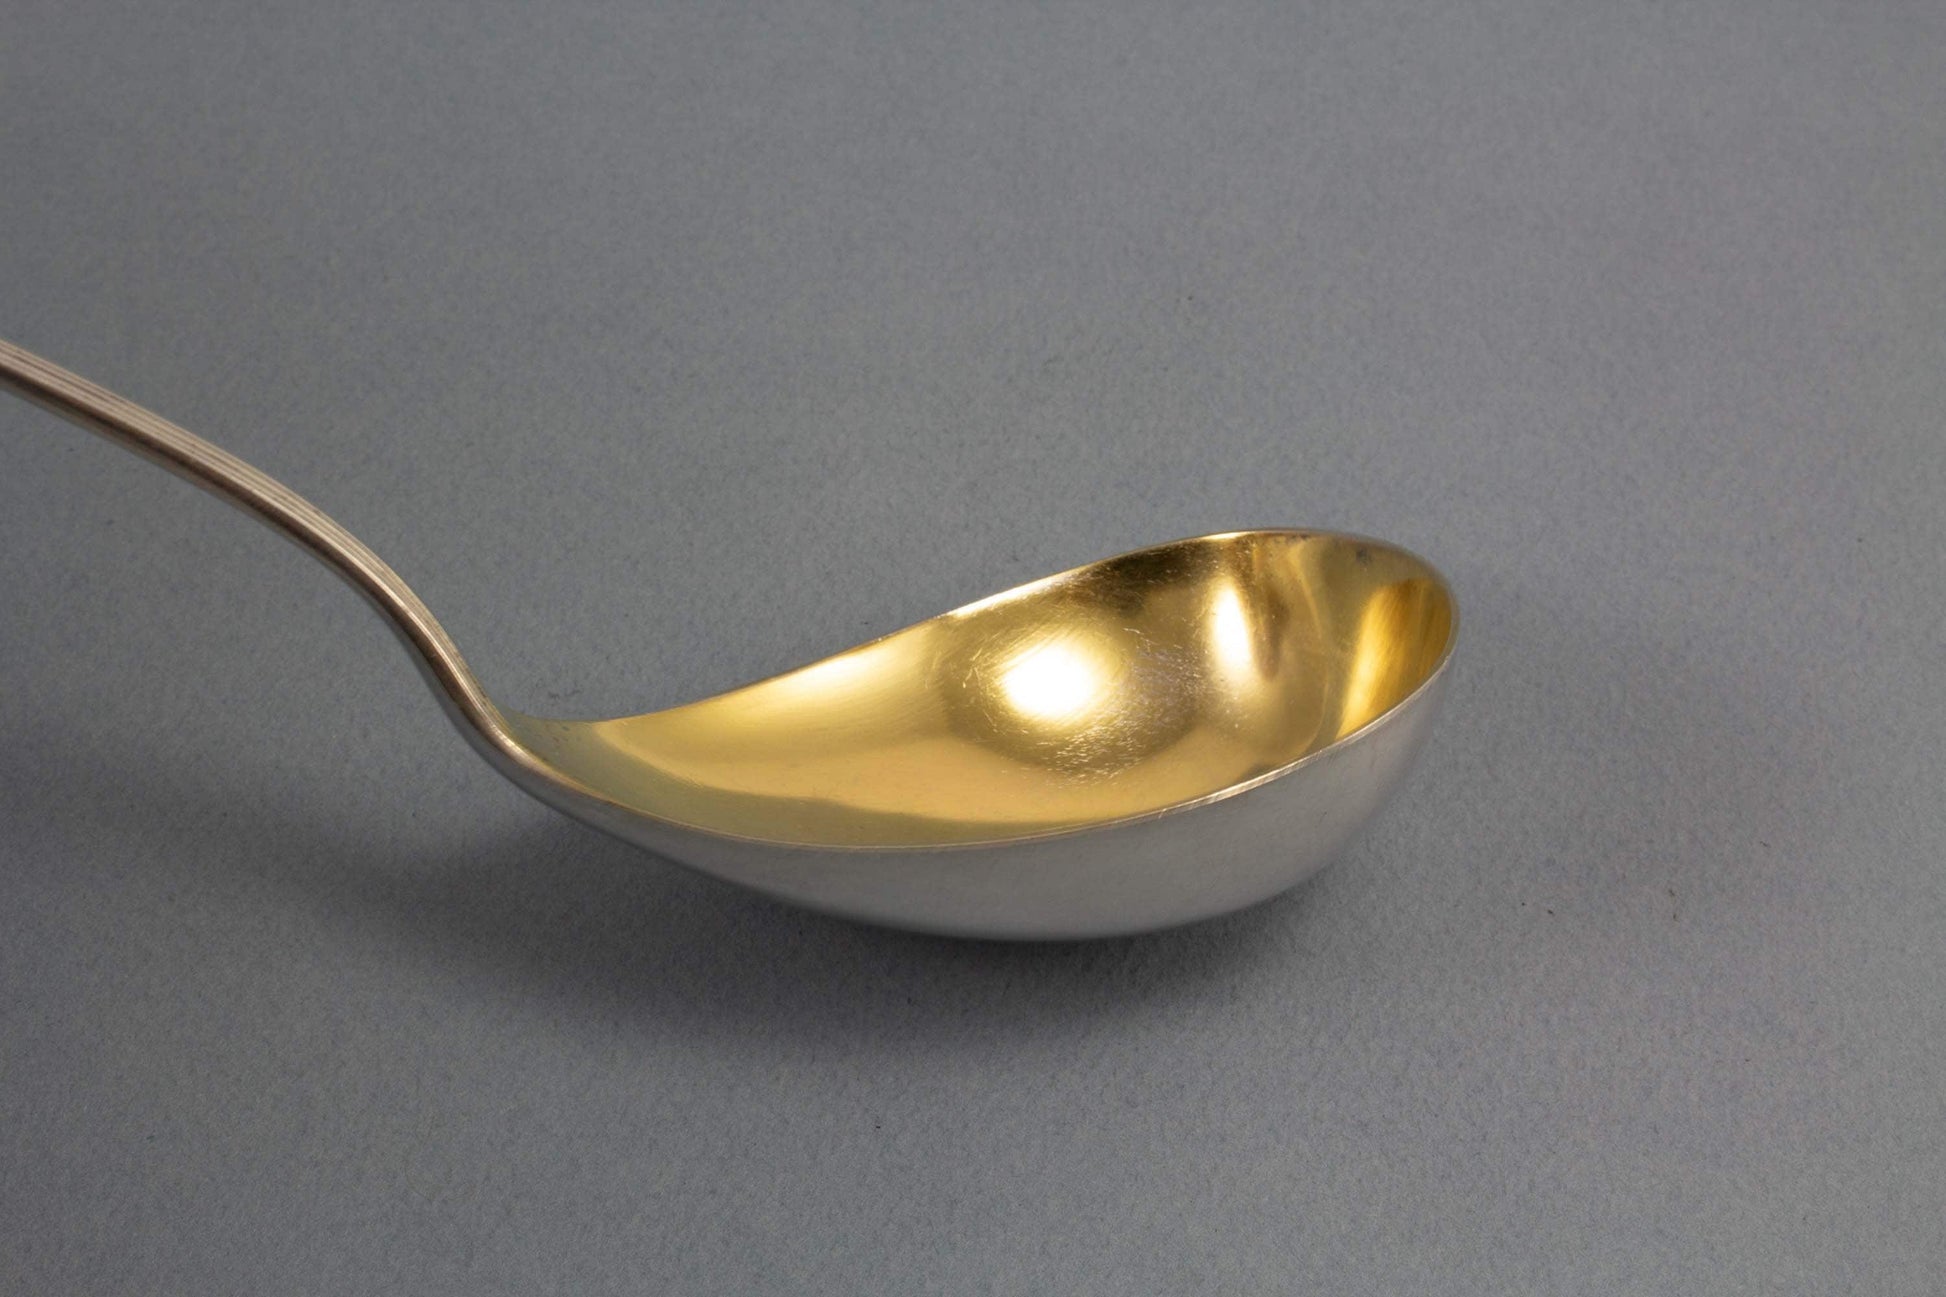 Rare sauce spoon from  WMF, WMF 300, large spoon for sauce